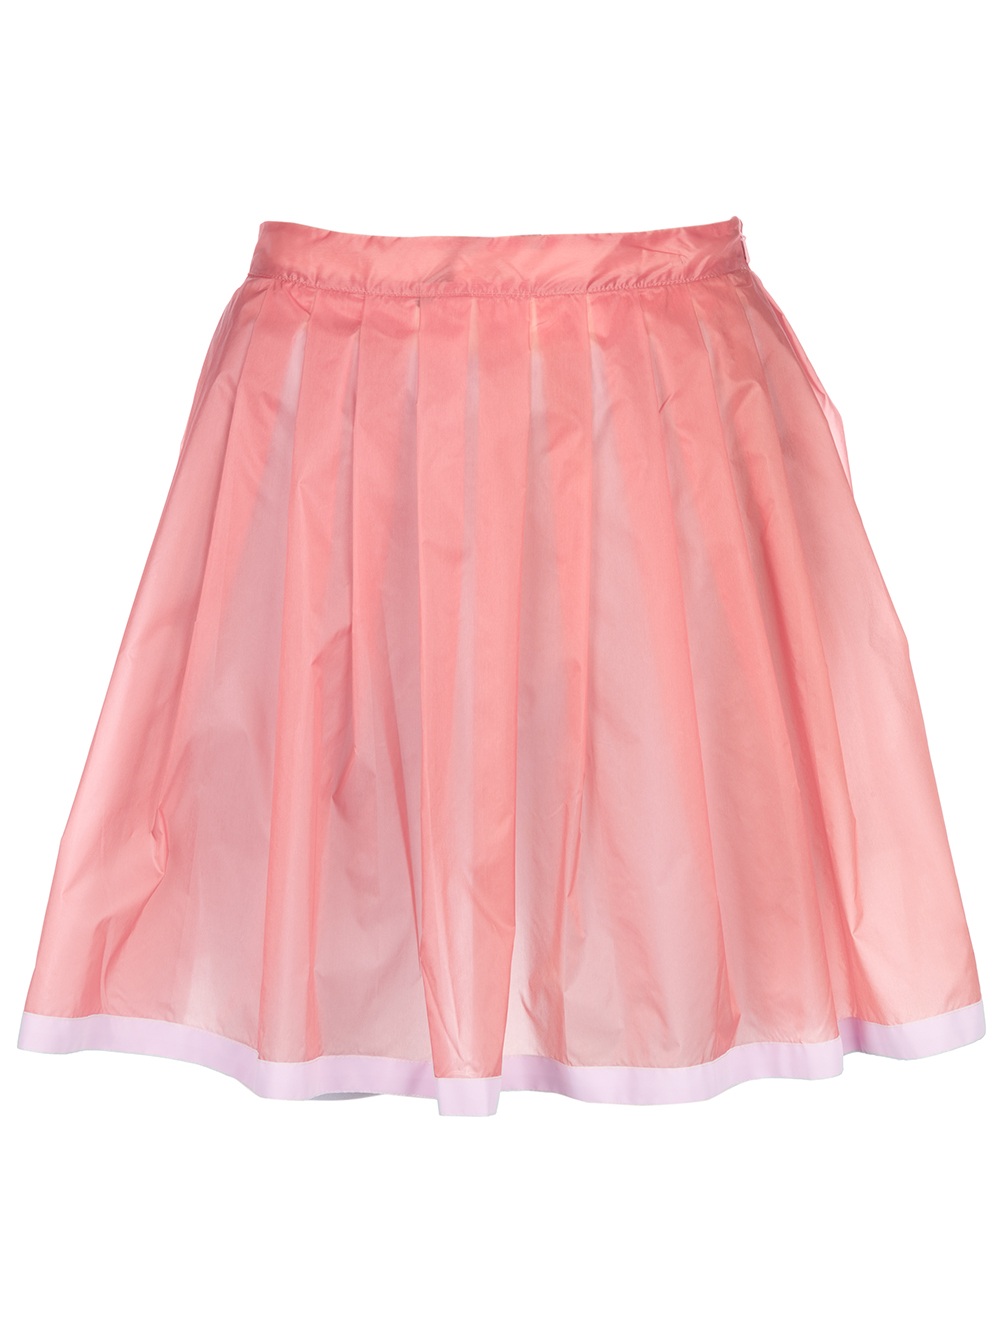 Adidas Originals X Opening Ceremony Pleated Sheer Skirt in Pink | Lyst